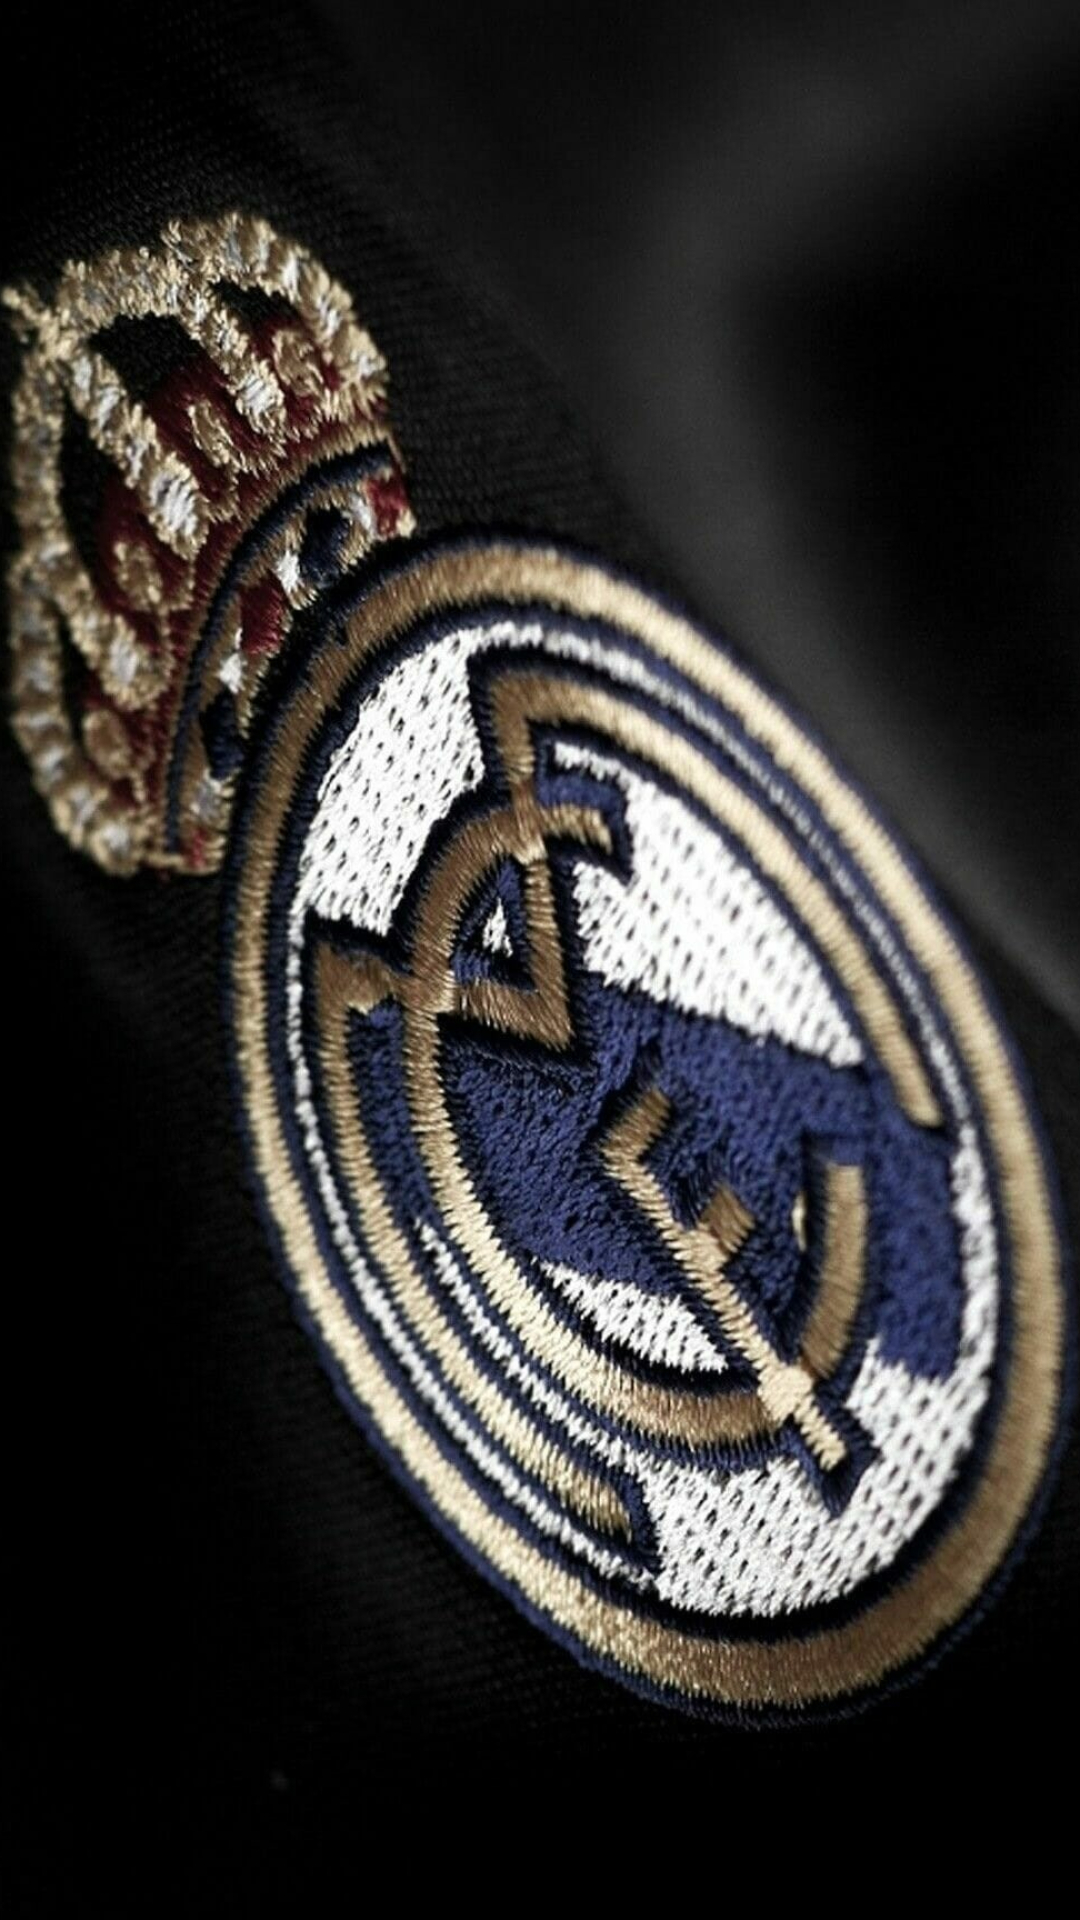 Real Madrid C.F., Football club, Android iPhone wallpapers, HD backgrounds, 1080x1920 Full HD Handy